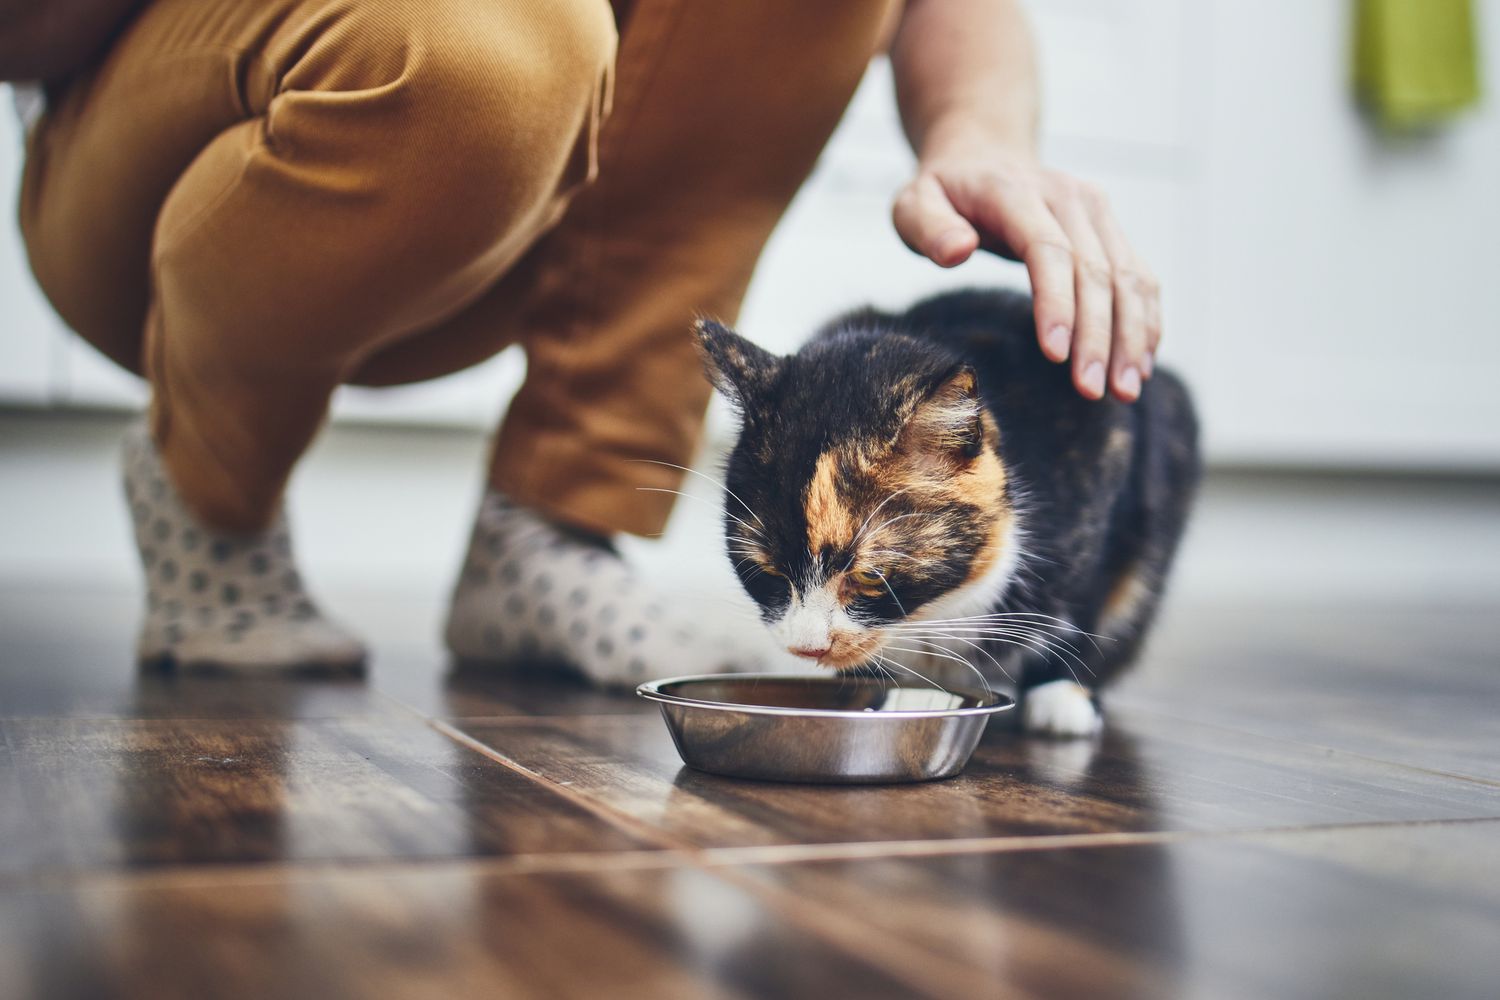 Low Section Of Woman Feeding Cat At Home - stock photo